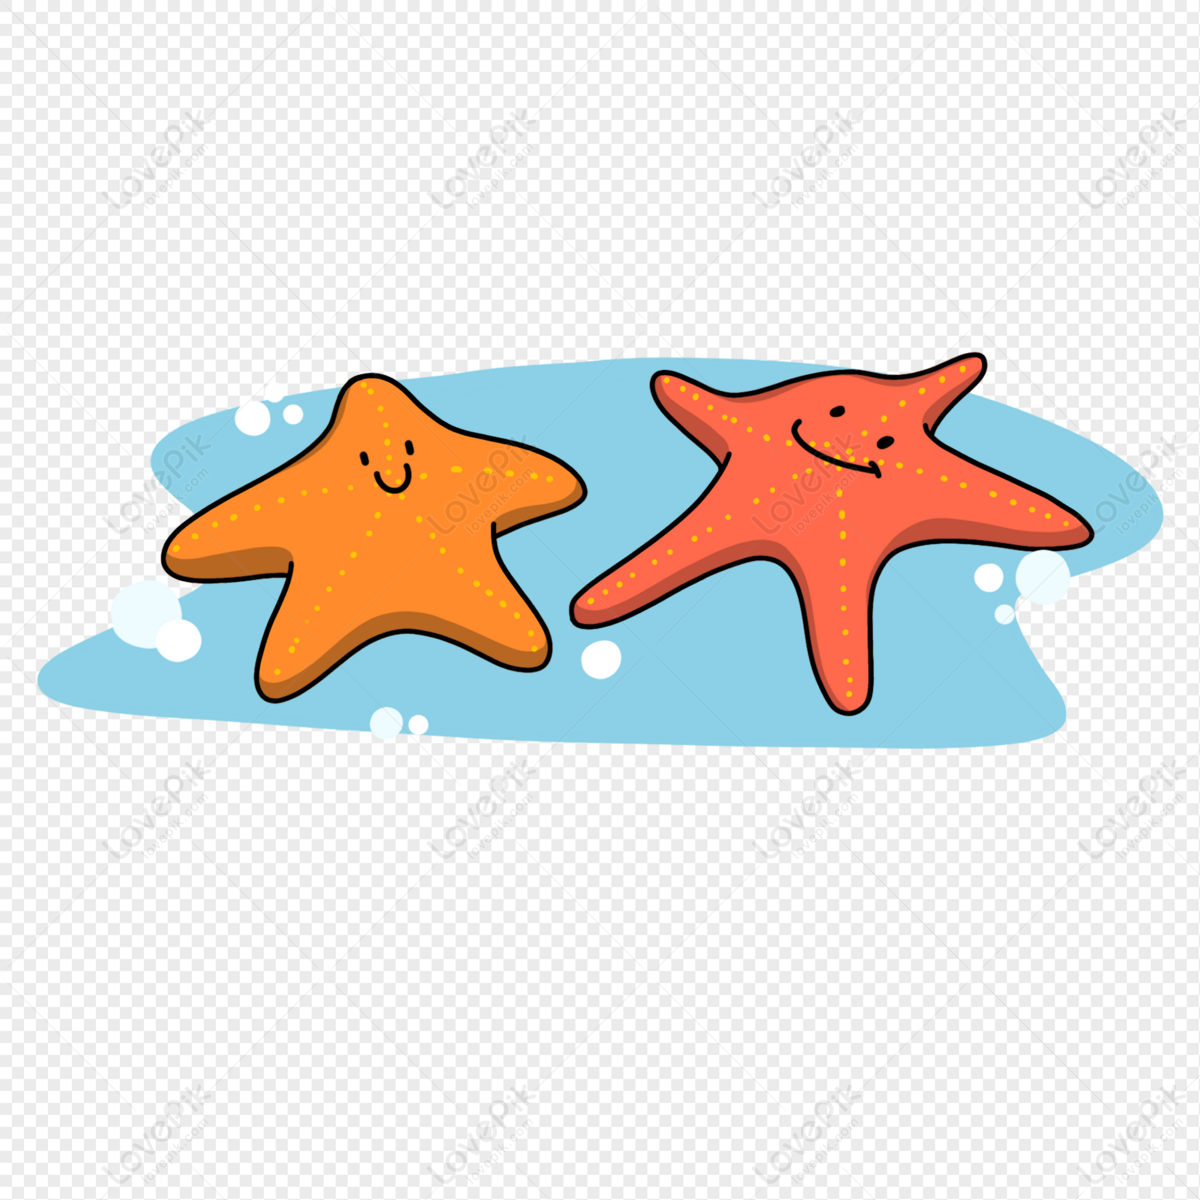 Cartoon Starfish Two PNG Picture And Clipart Image For Free Download -  Lovepik | 401456765